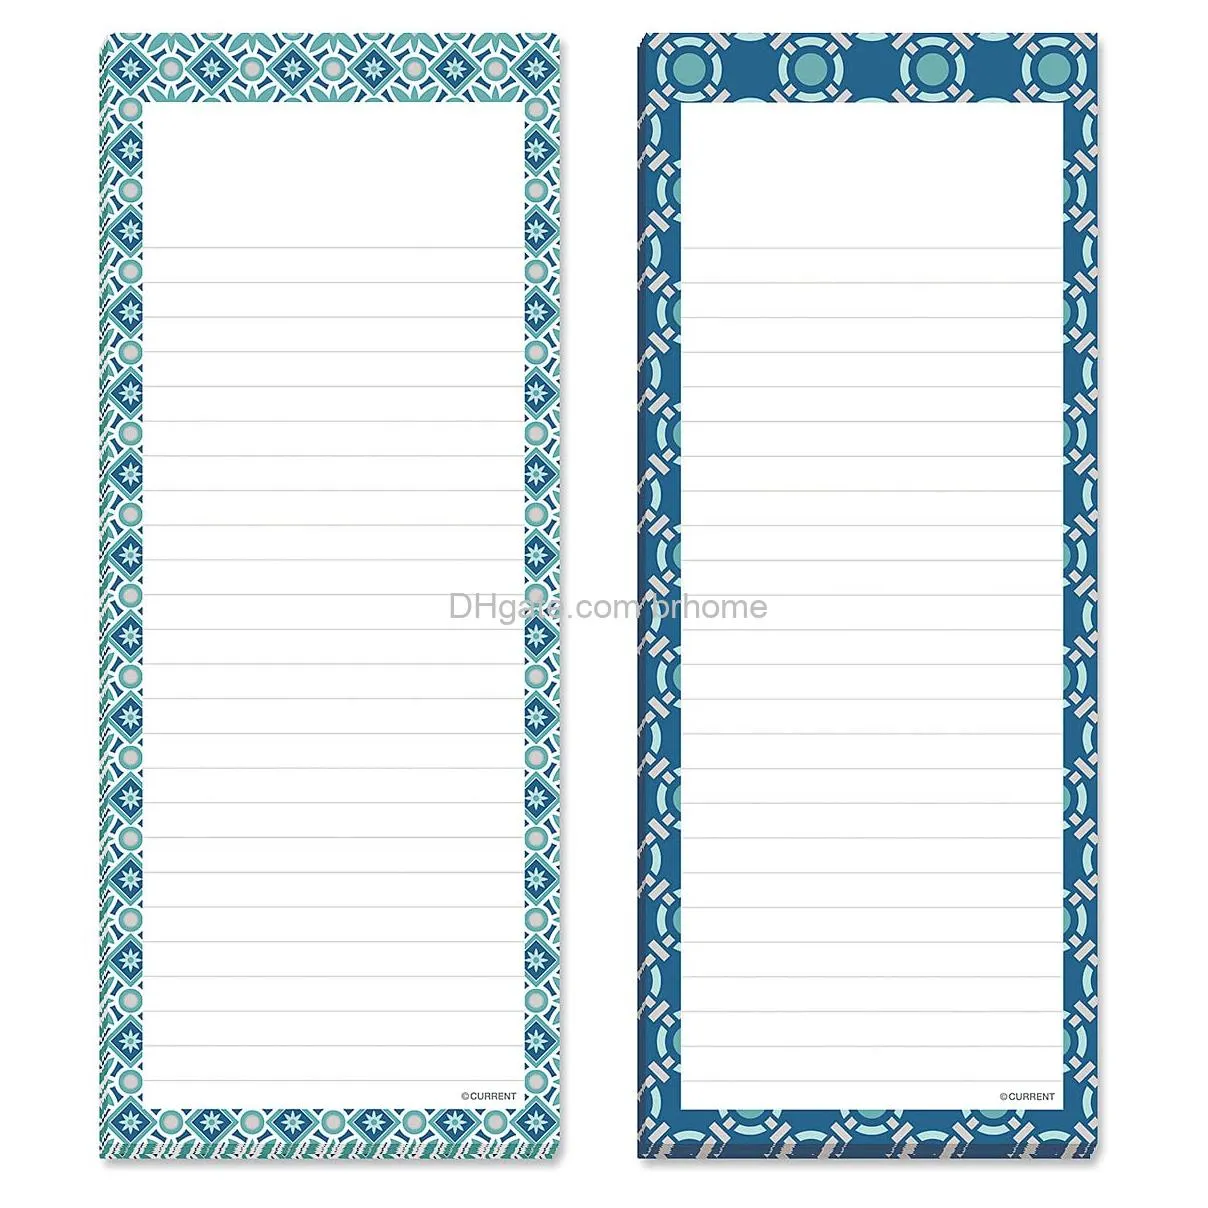 cool patterns magnetic notepads set of 6 50sheet pads 3 1/4 x 8 inches lined memo pads shipping list office organizer